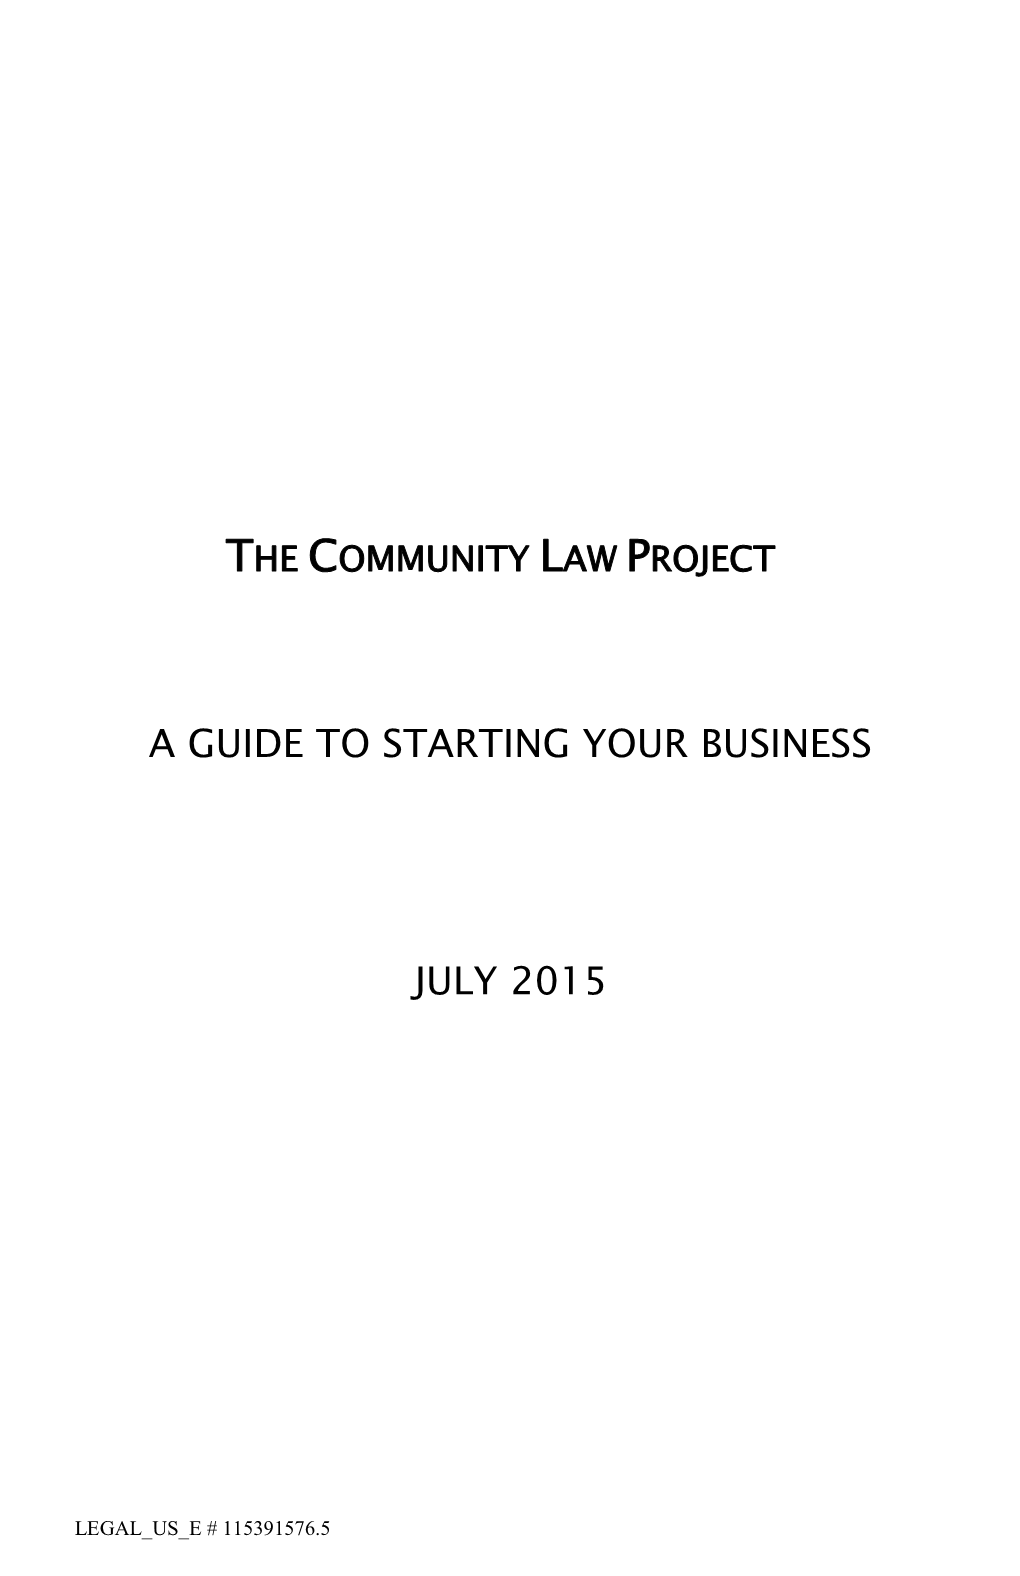 A Guide to Starting Your Business July 2015